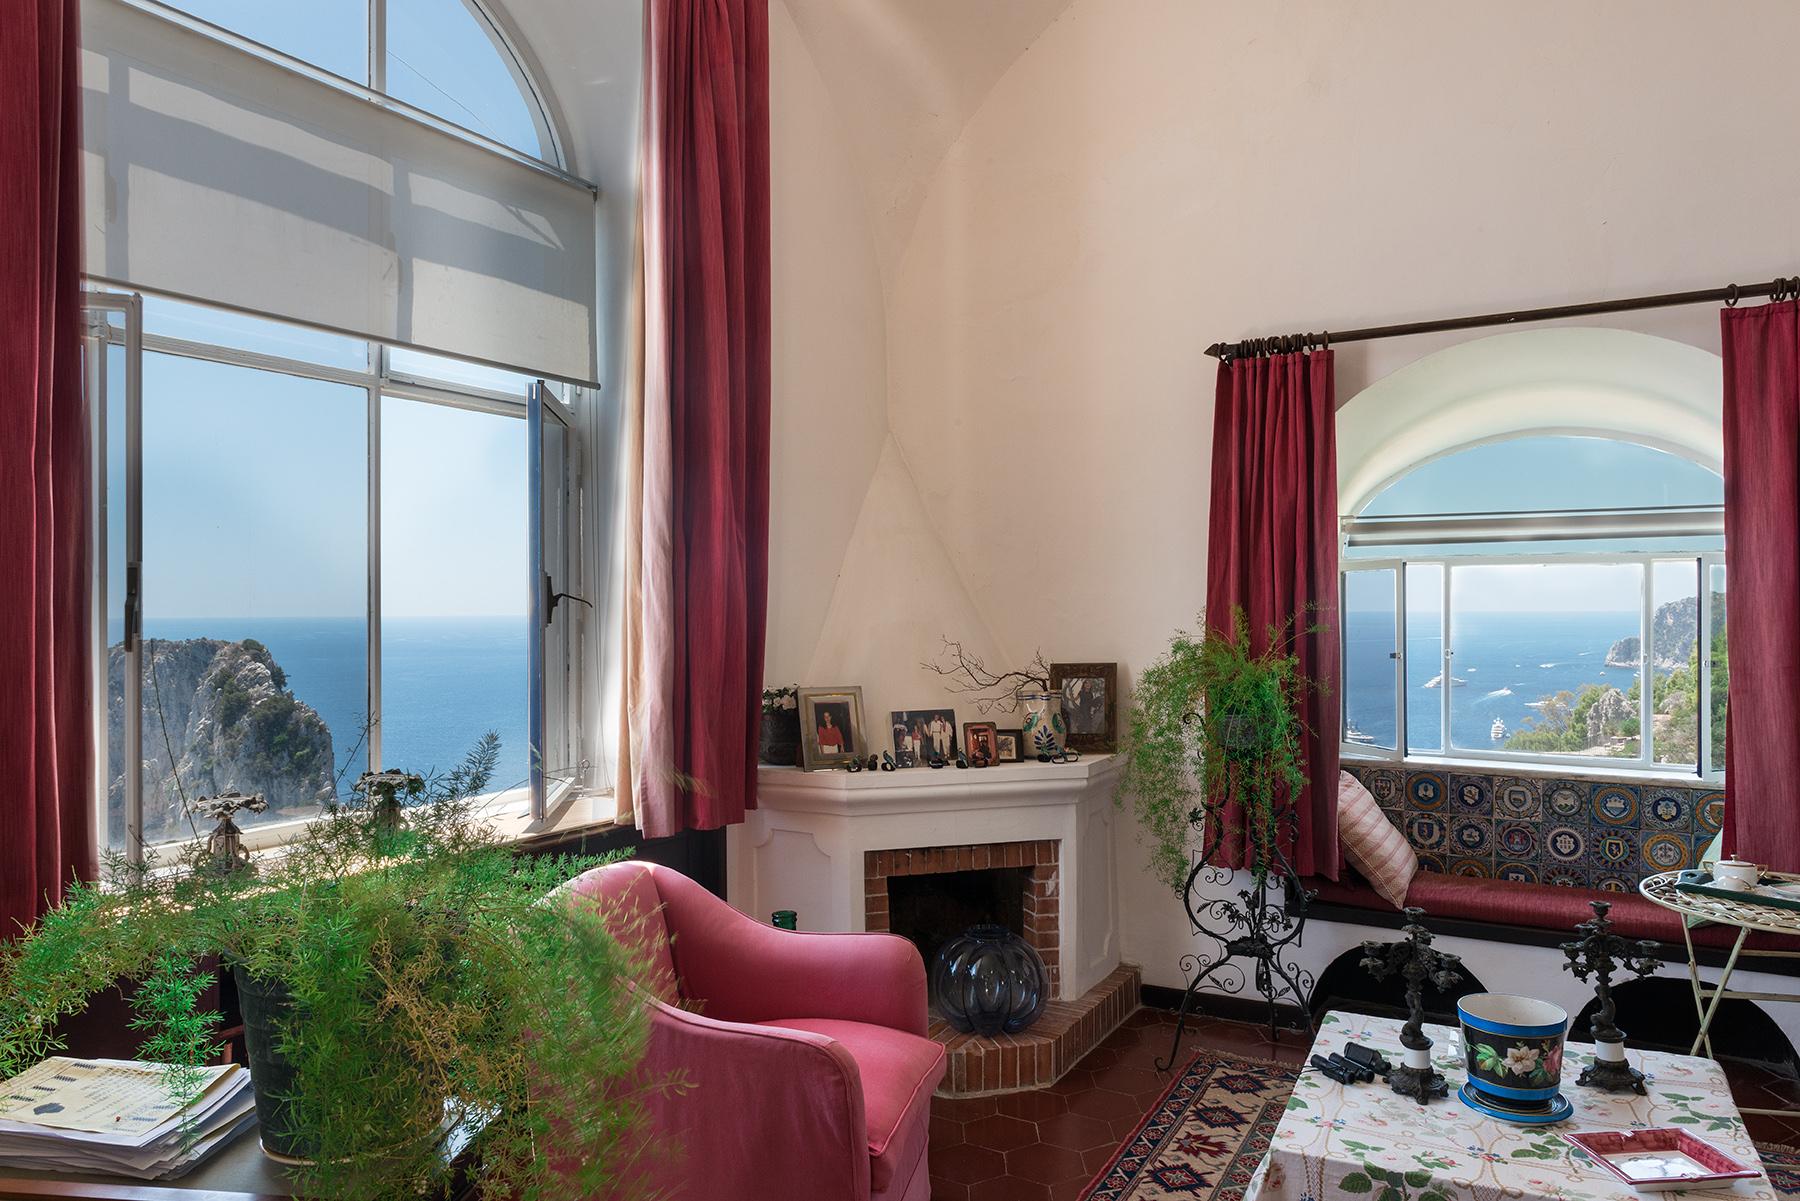 Remarkable villa with a breathtaking panorama on the Faraglioni rocks - 20